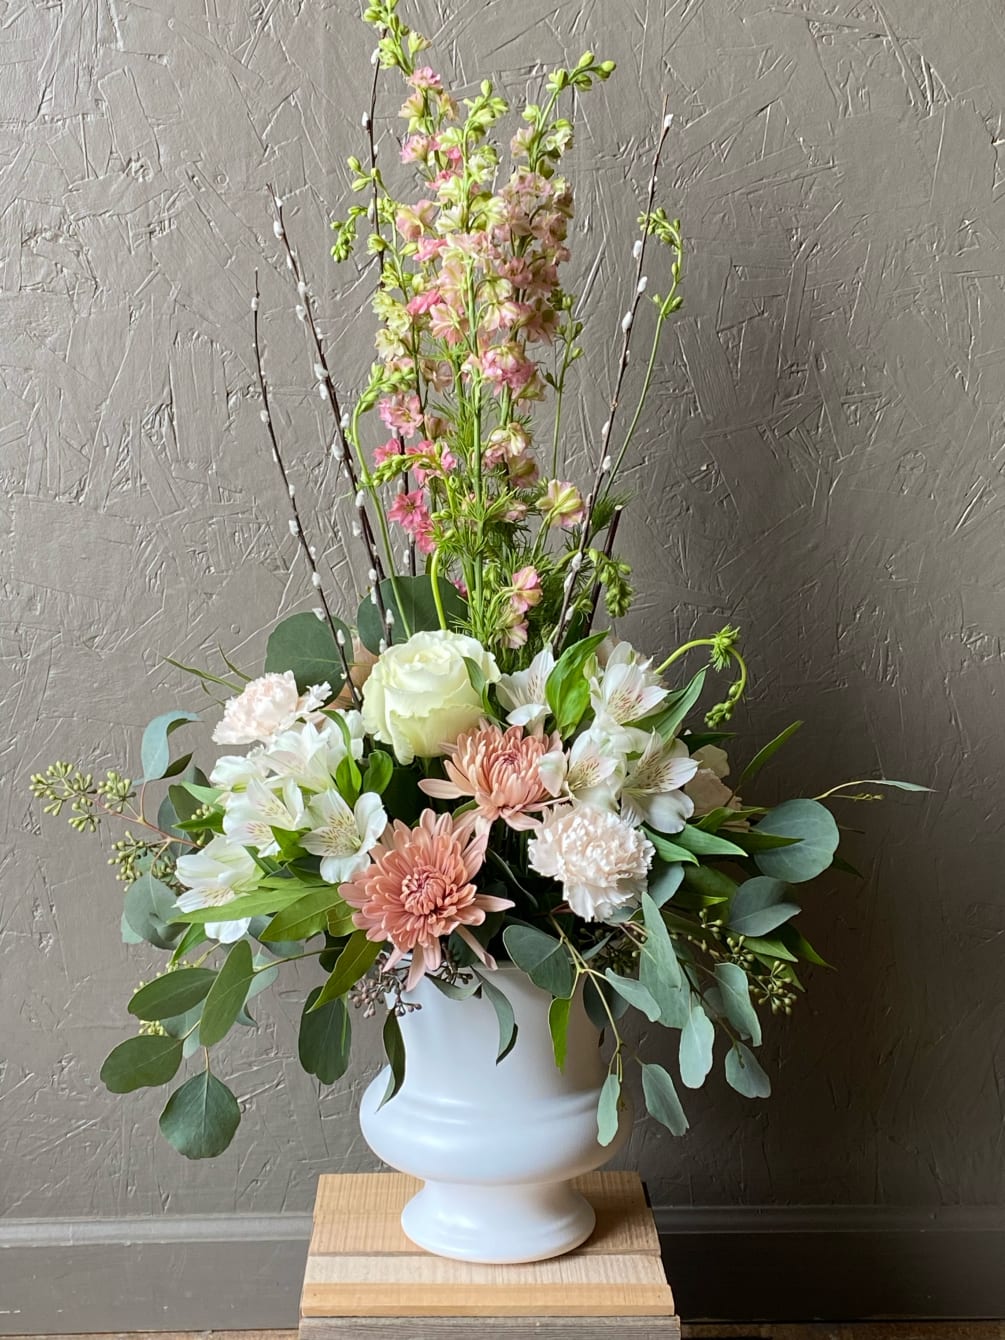 Beautiful shades of pink and white create a unique and gardeny arrangement